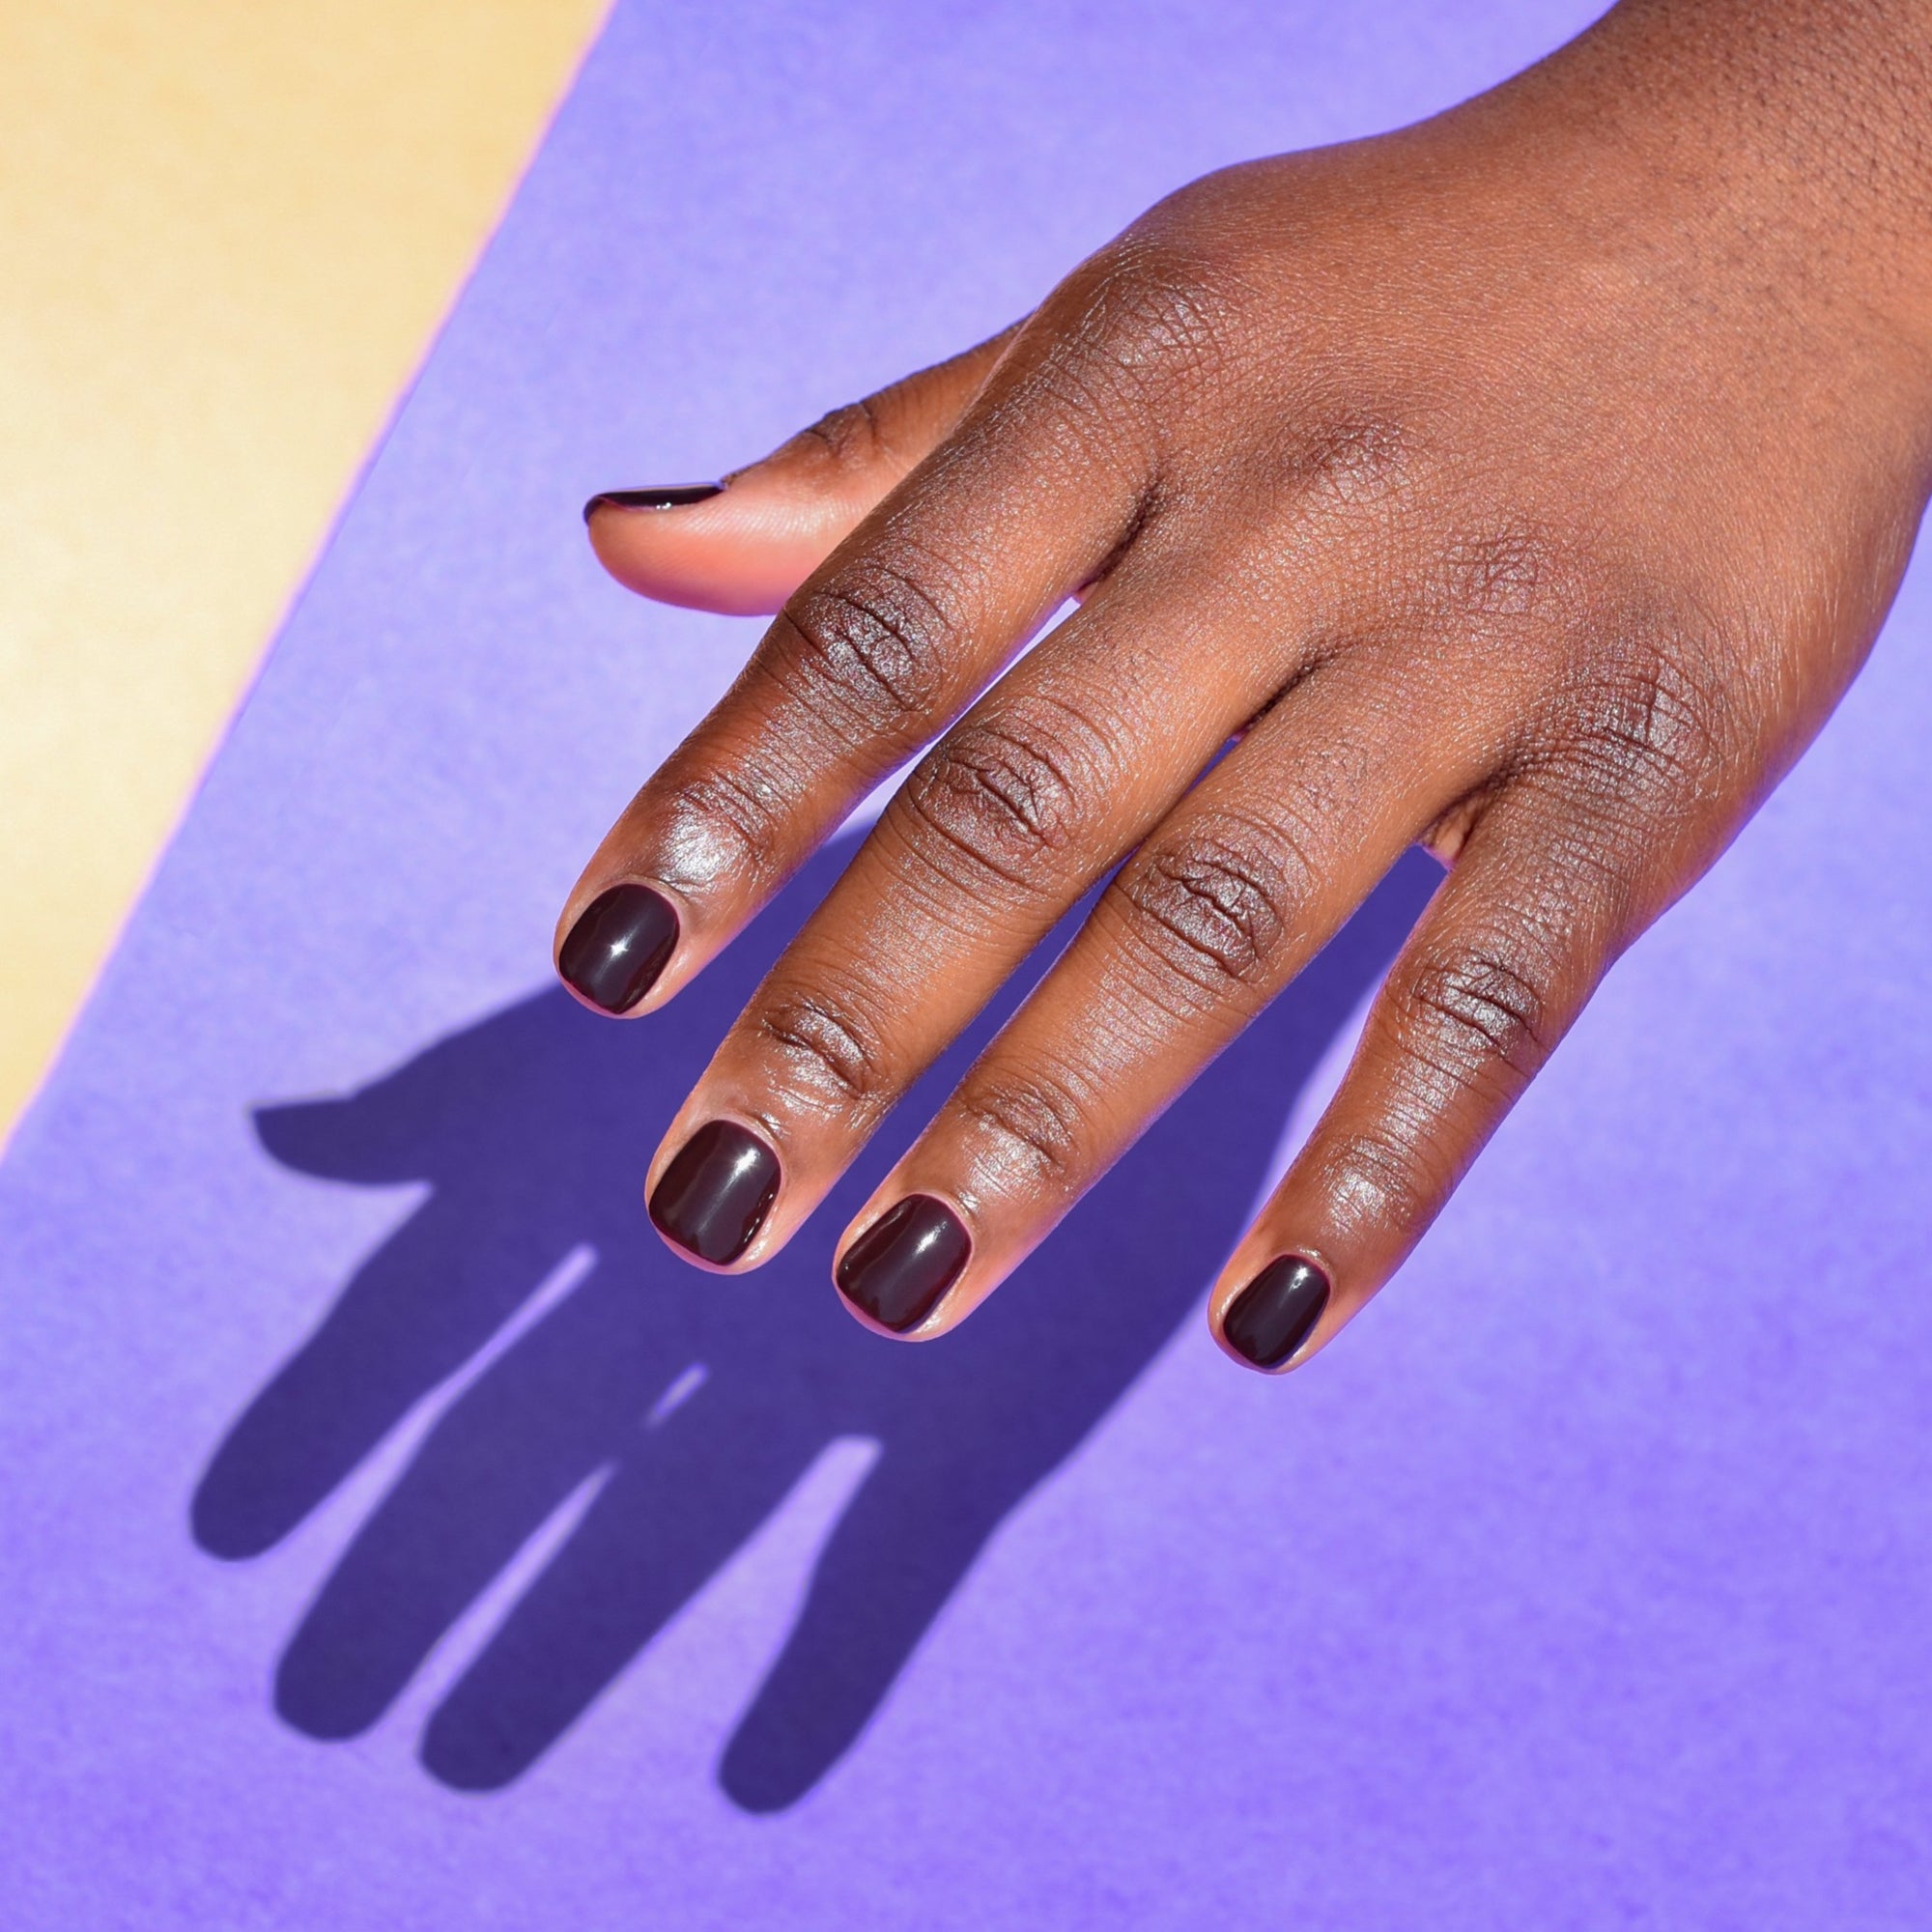 A close up of a brightly lit hand wearing Talk Birdie to Me nail polish from Hello Birdie which is a dark raisin purple hue. The hand casts a sharp shadow against a purple and cream paper background.